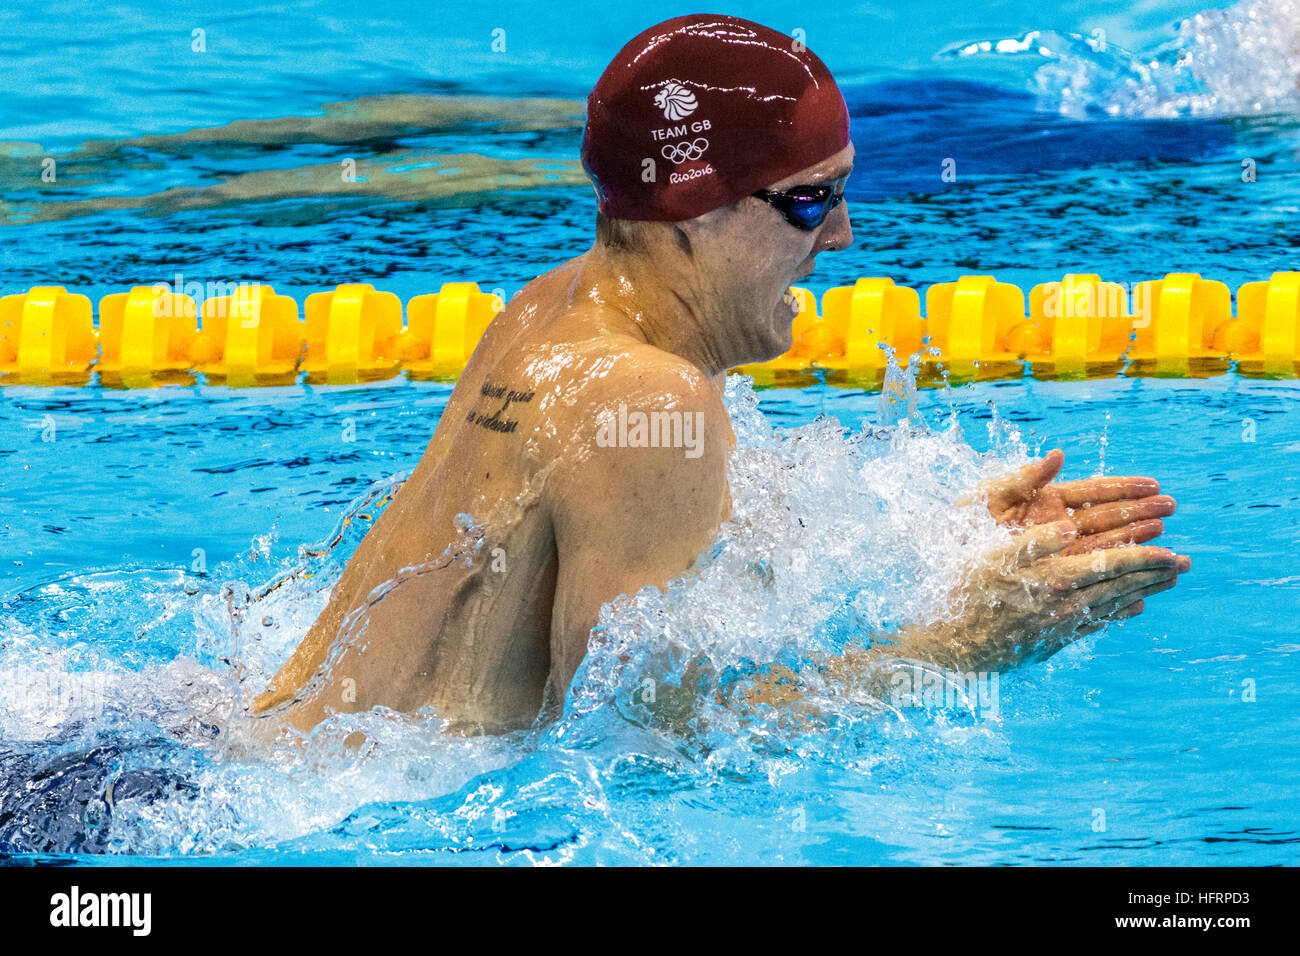 Rio de Janeiro, Brazil. 9 August 2016.   Andrew Willis (GBR) competing in the semifinal of the men's 200m breaststroke at the 2016 Olympic Summer Game Stock Photo